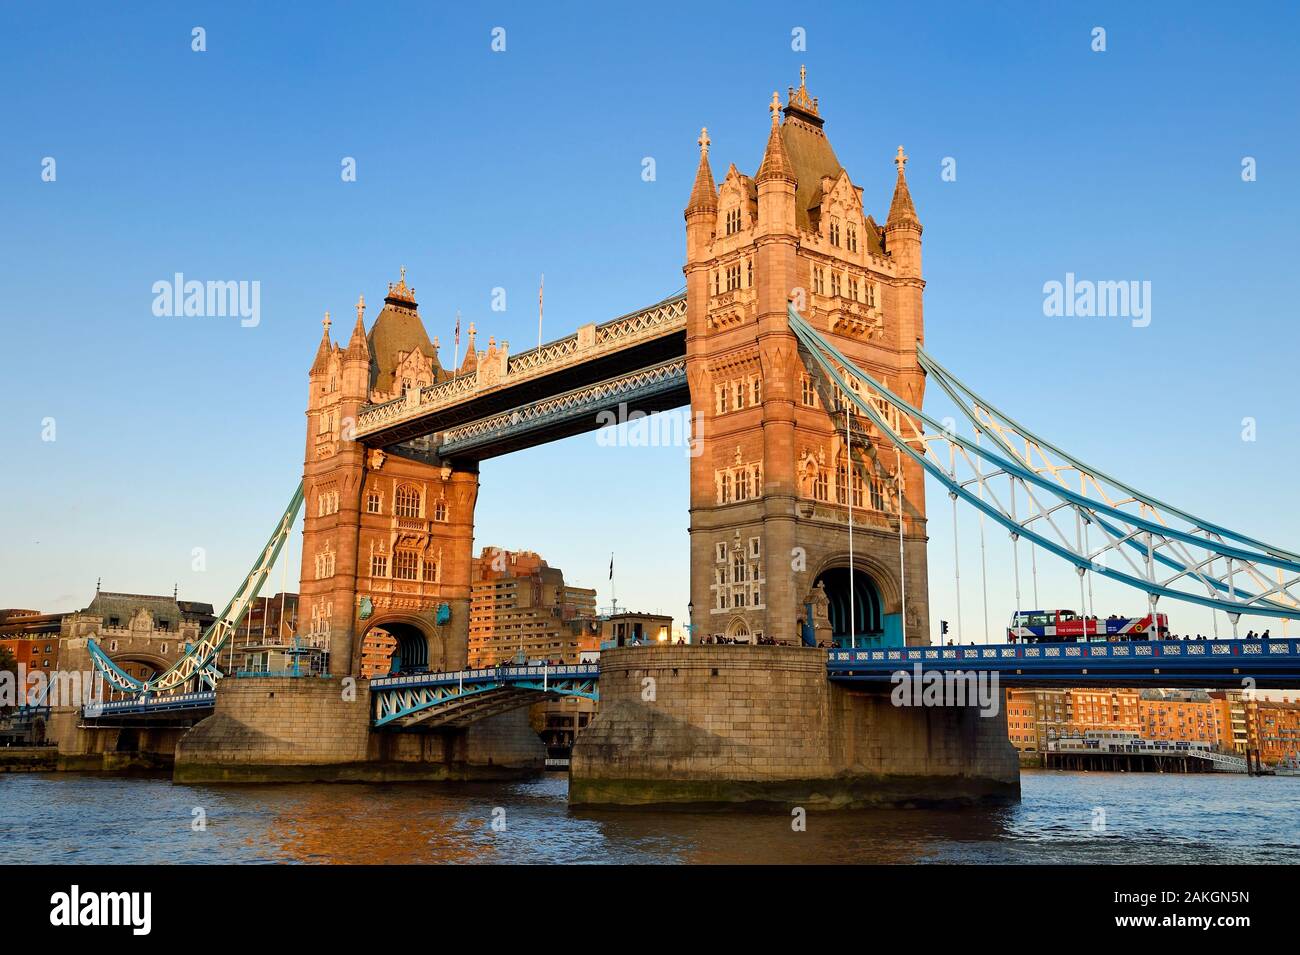 United Kingdom, London, Tower Bridge, swing bridge across the Thames, between the districts of Southwark and Tower Hamlets Stock Photo